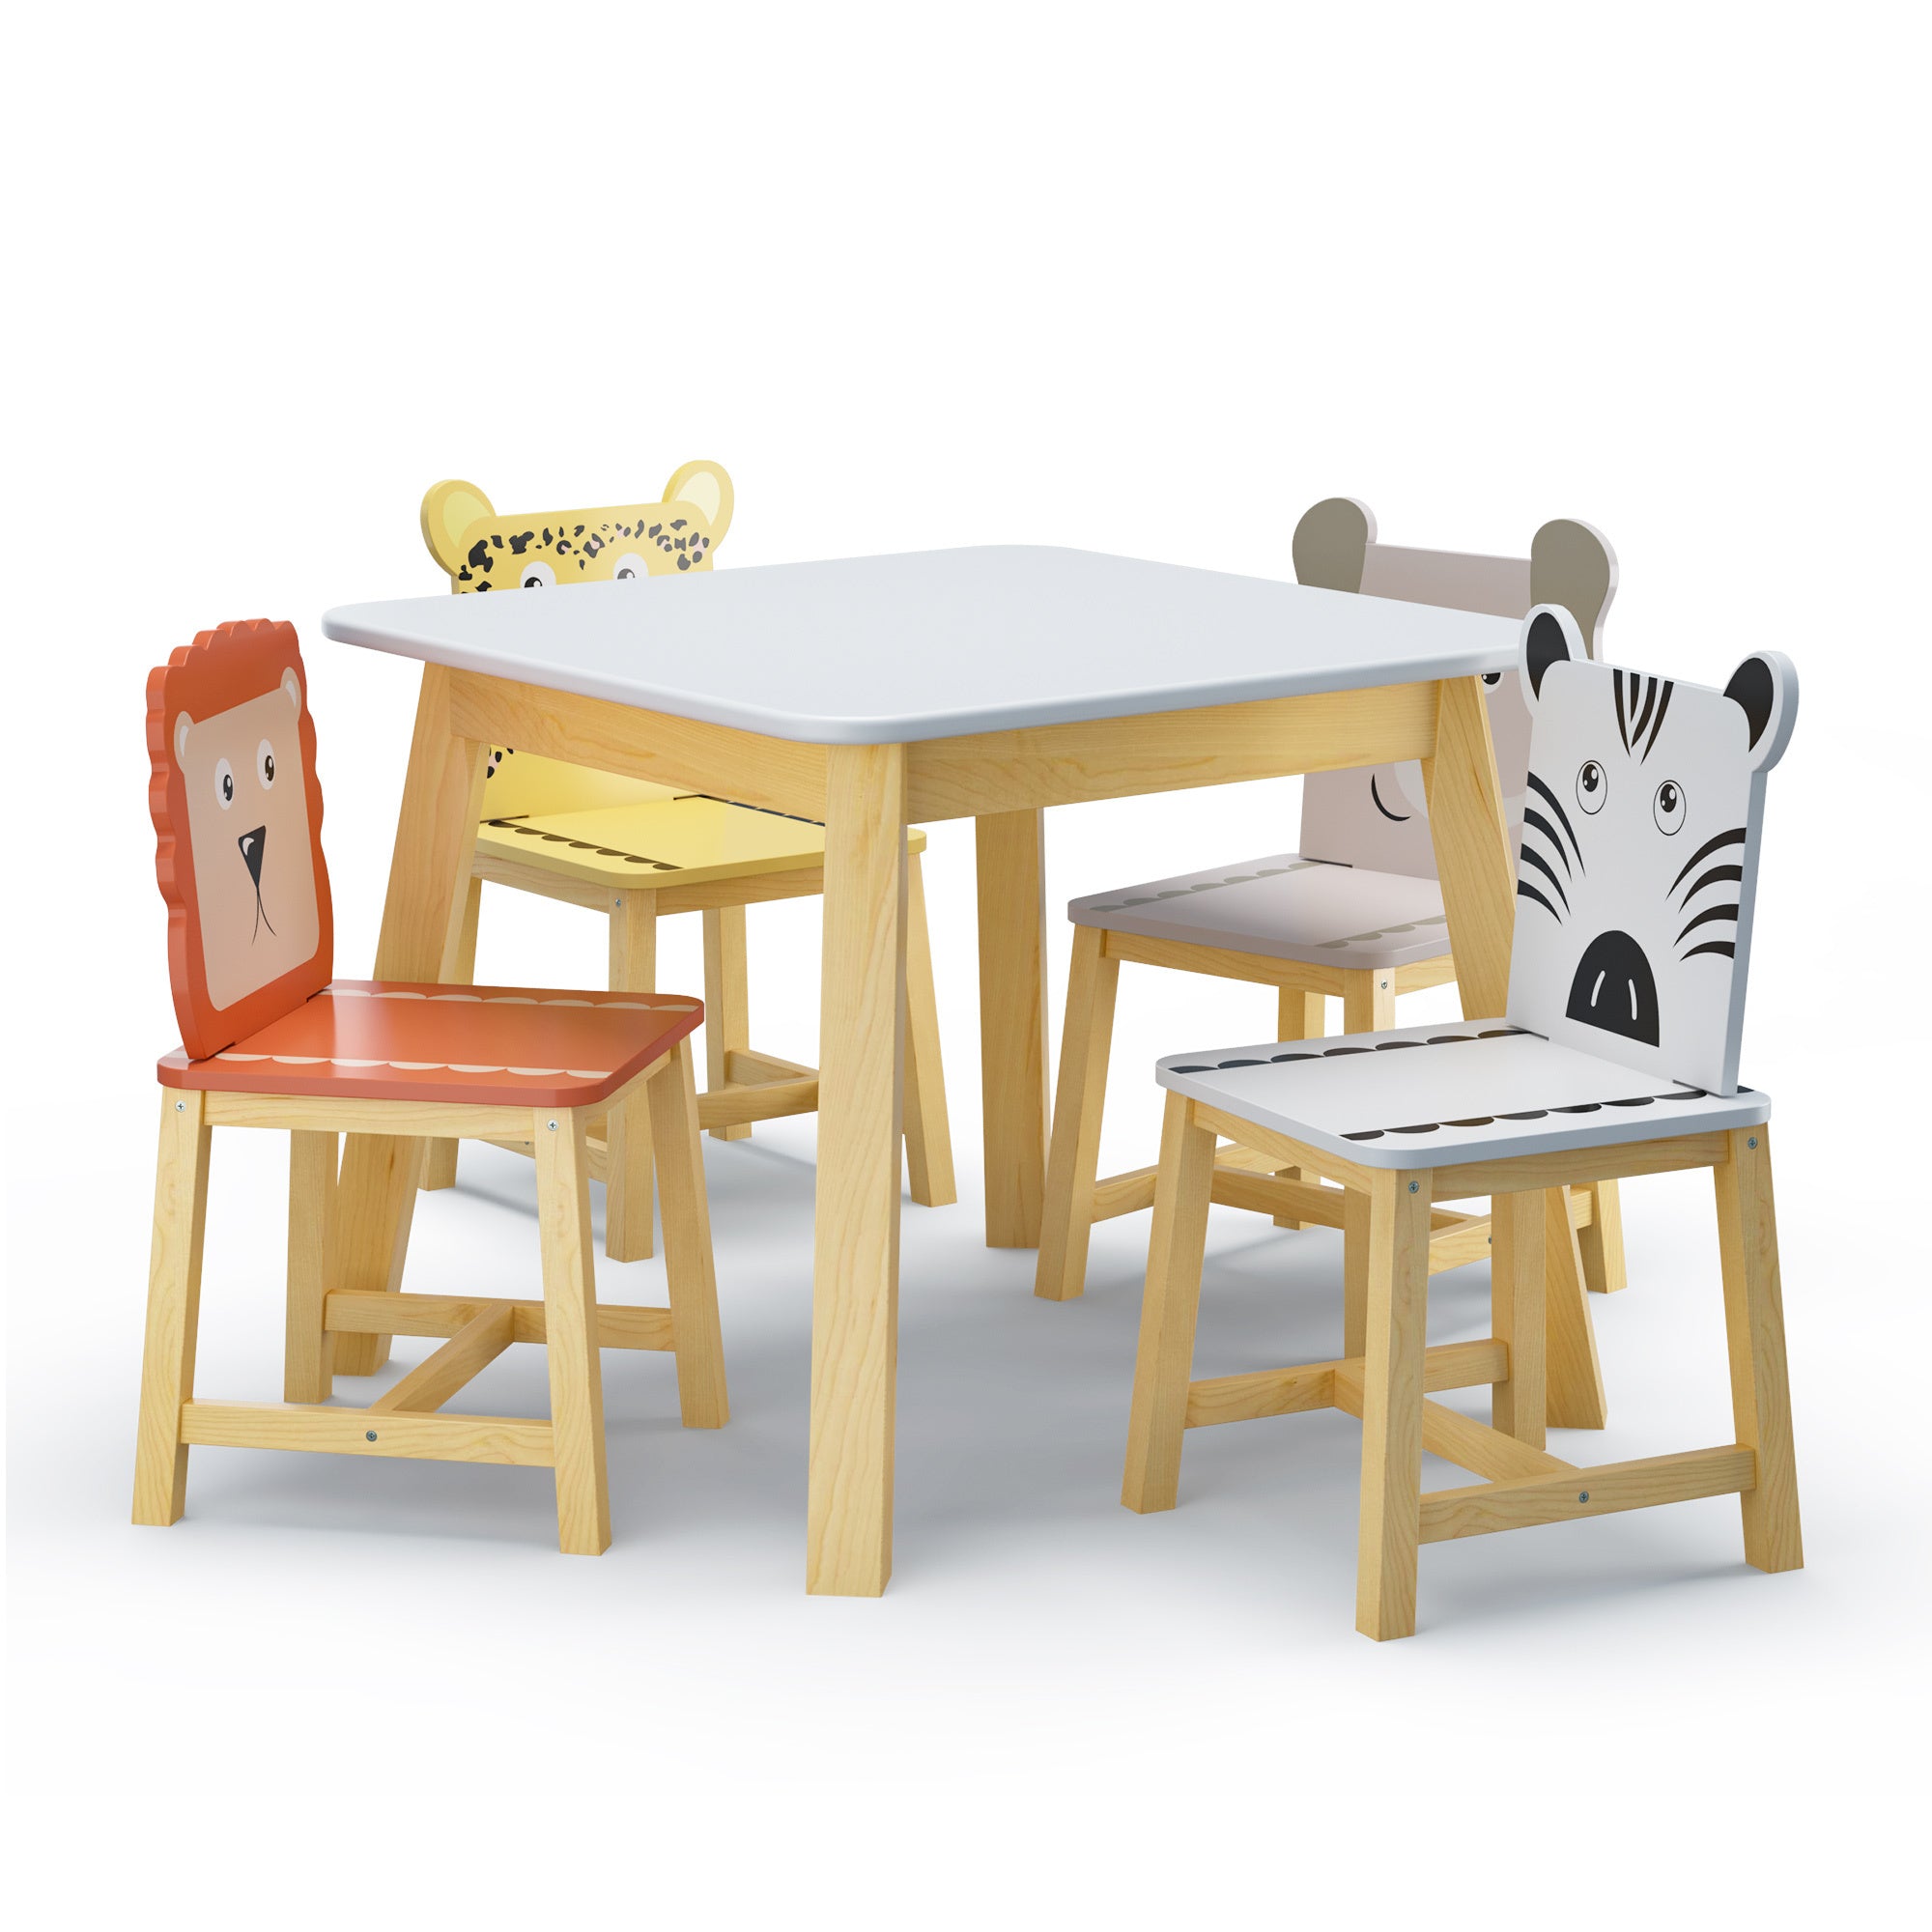 5 Piece Kiddy Table and Chair Set , Kids Wood Table with 4 Chairs Set Cartoon Animals（3-8 years old）